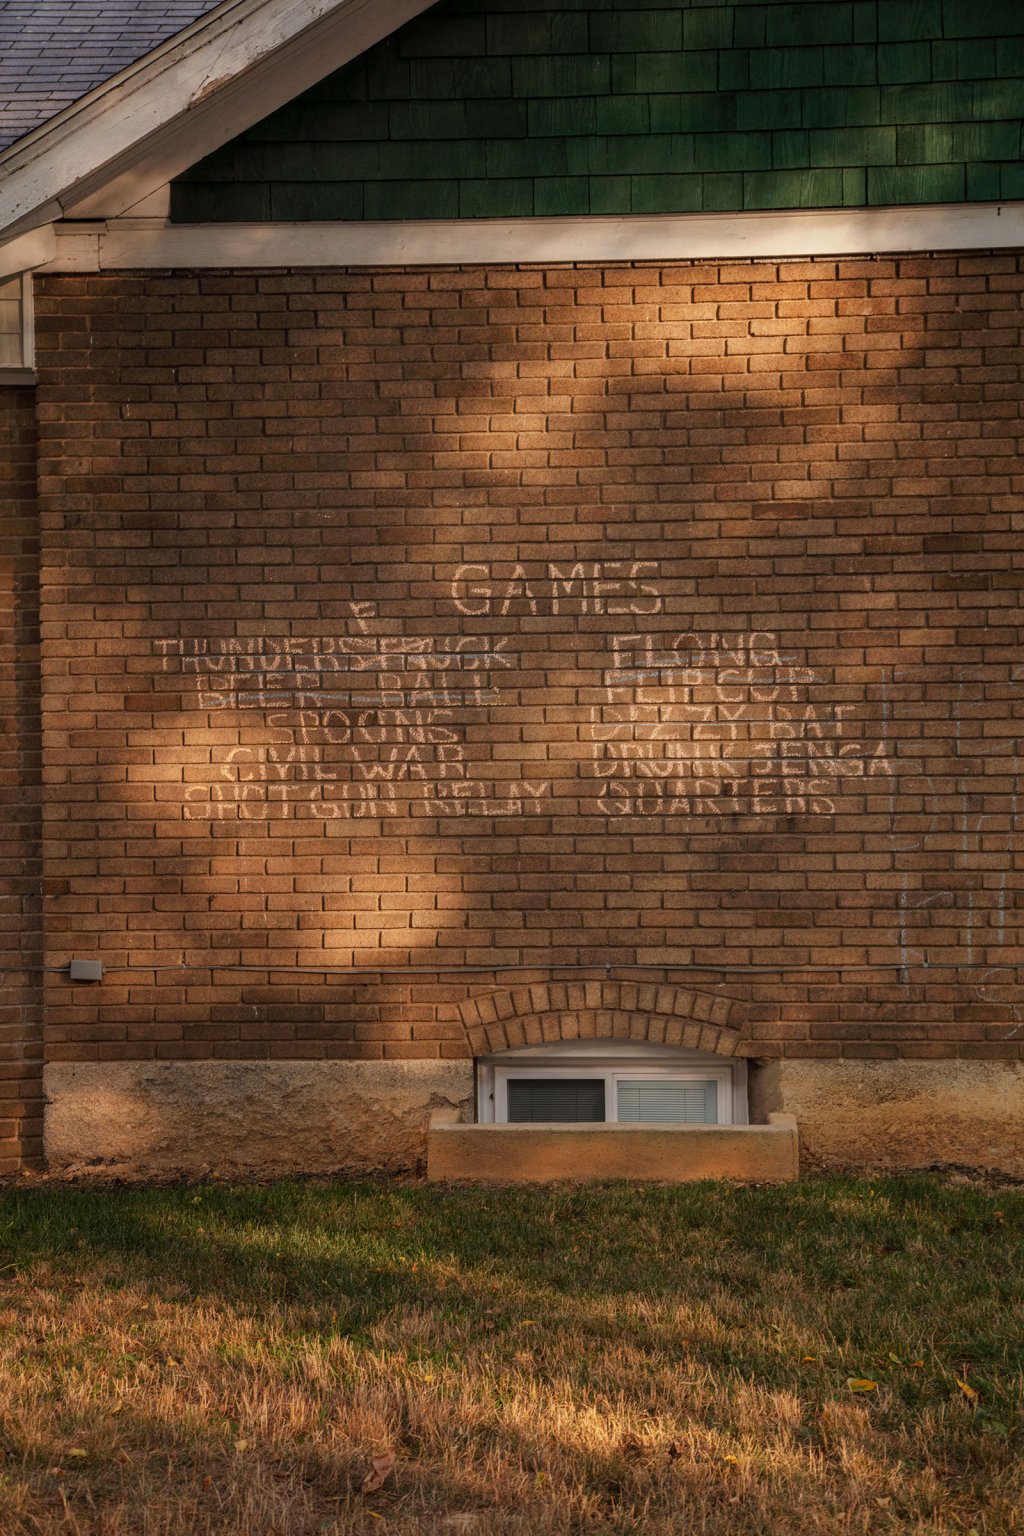 A list of drinking games on the side of a house in State College, Pa. The typically bustling main campus of Pennsylvania State University was quieter than normal.